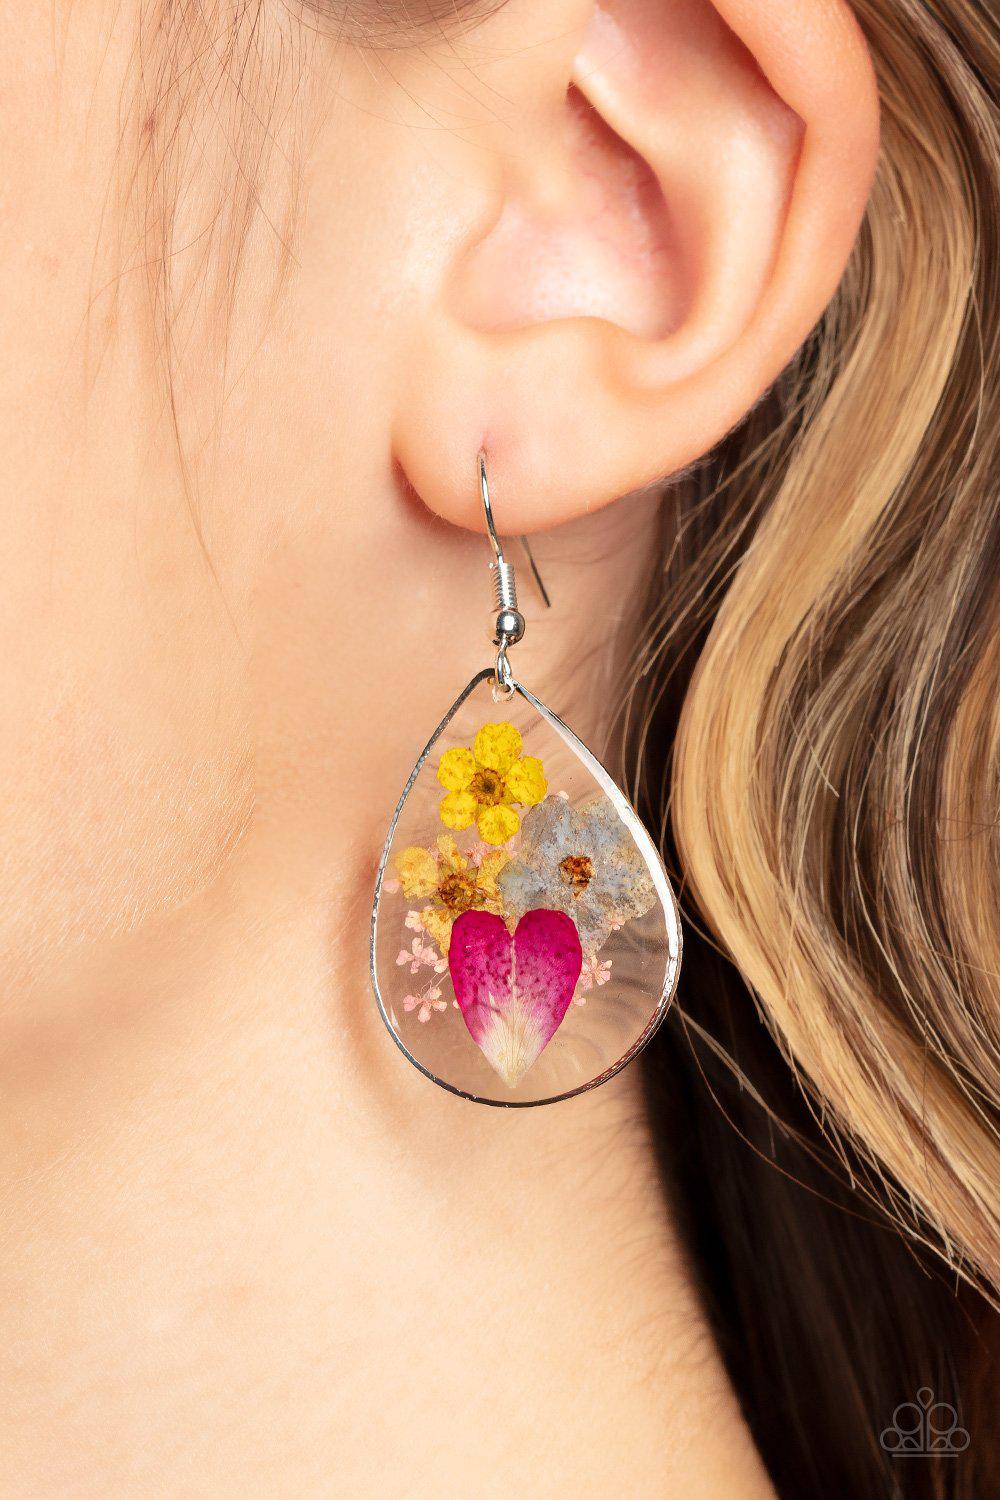 Paparazzi Accessories: Glimmering Gardens - Pink Acrylic Flower Earrings